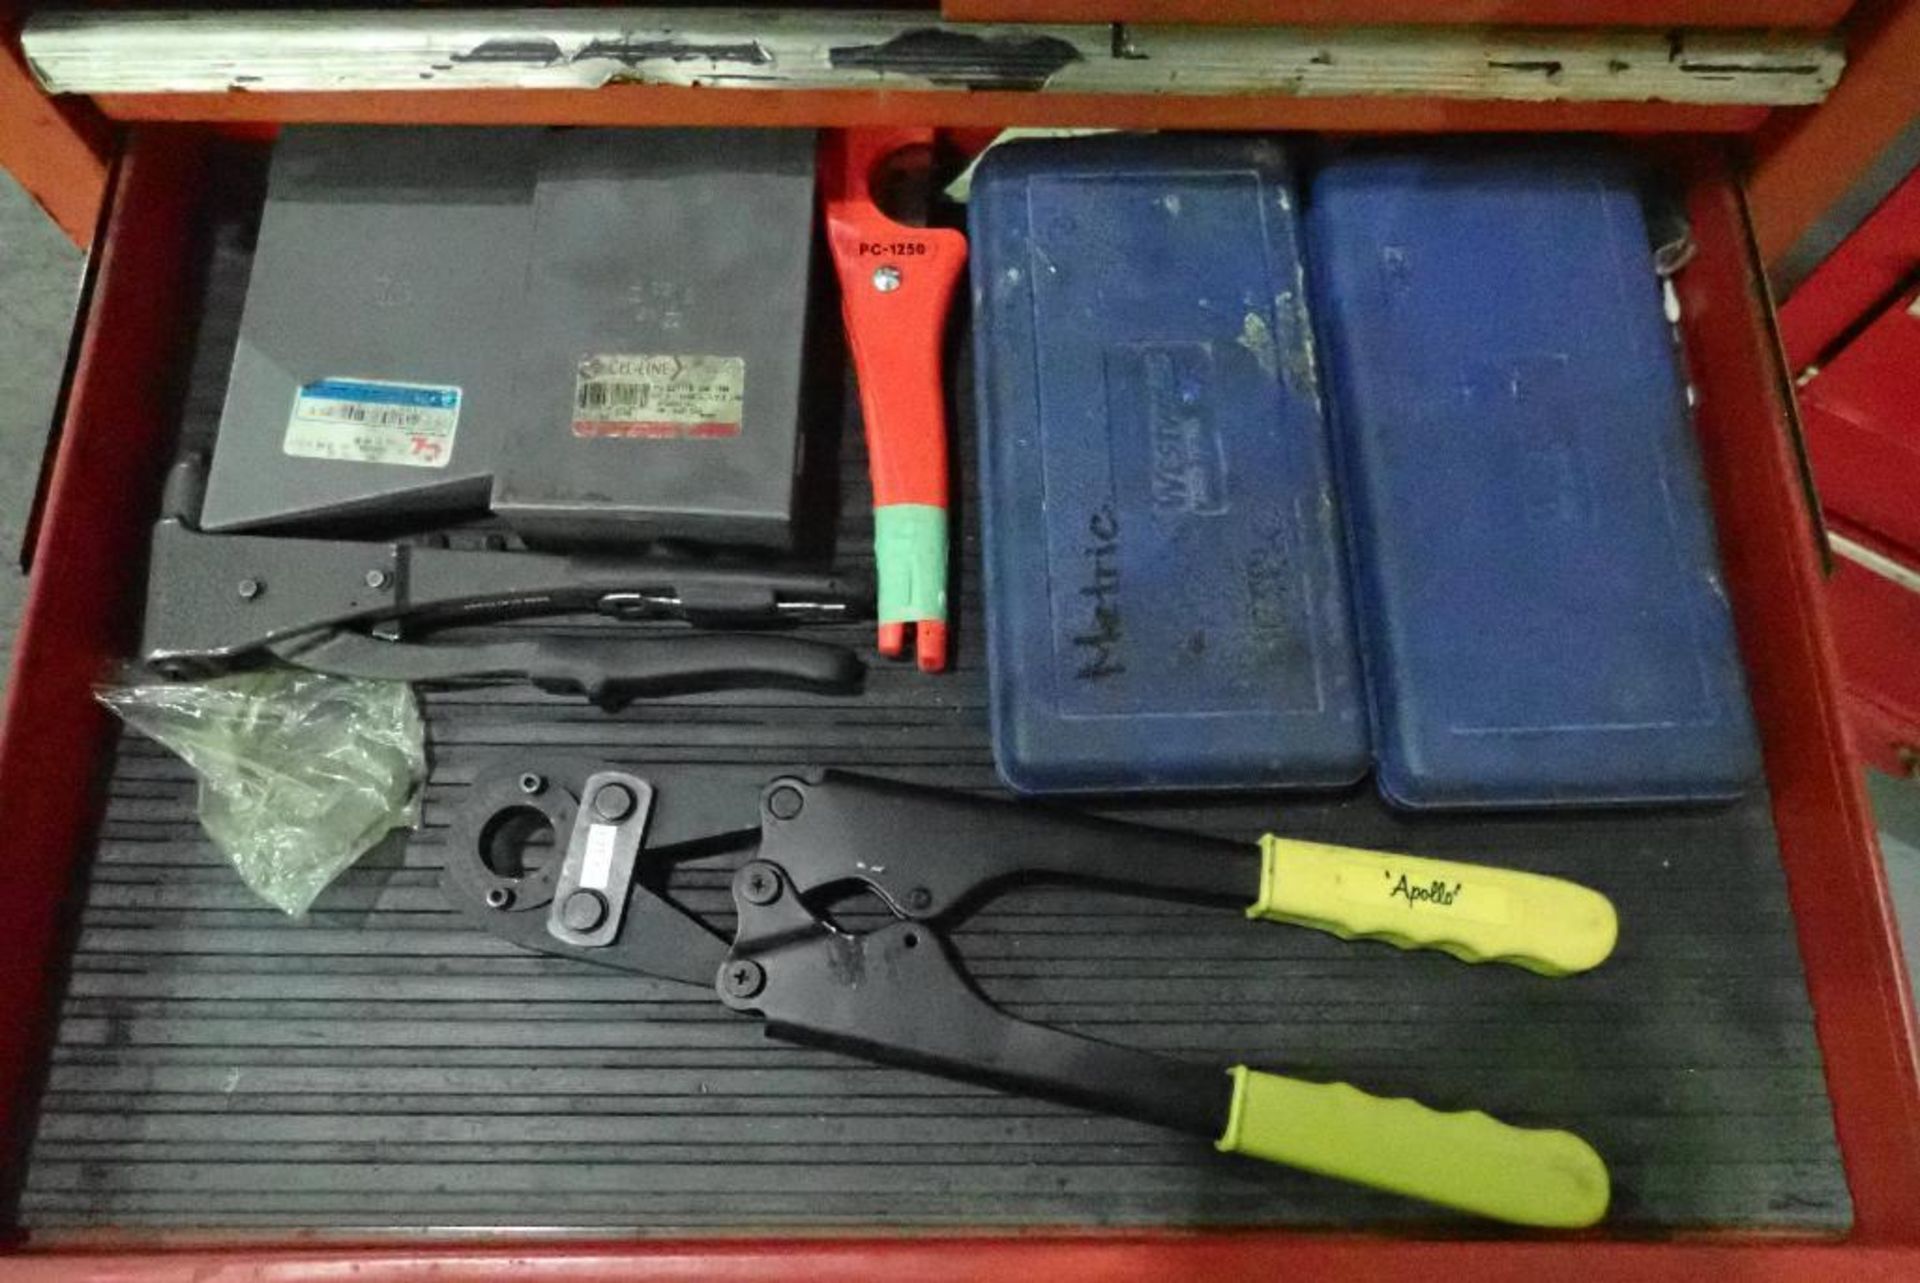 (2) tool chests with contents, wrenches, sockets, drill bits screw drivers, air tools, hammers, plie - Image 27 of 31